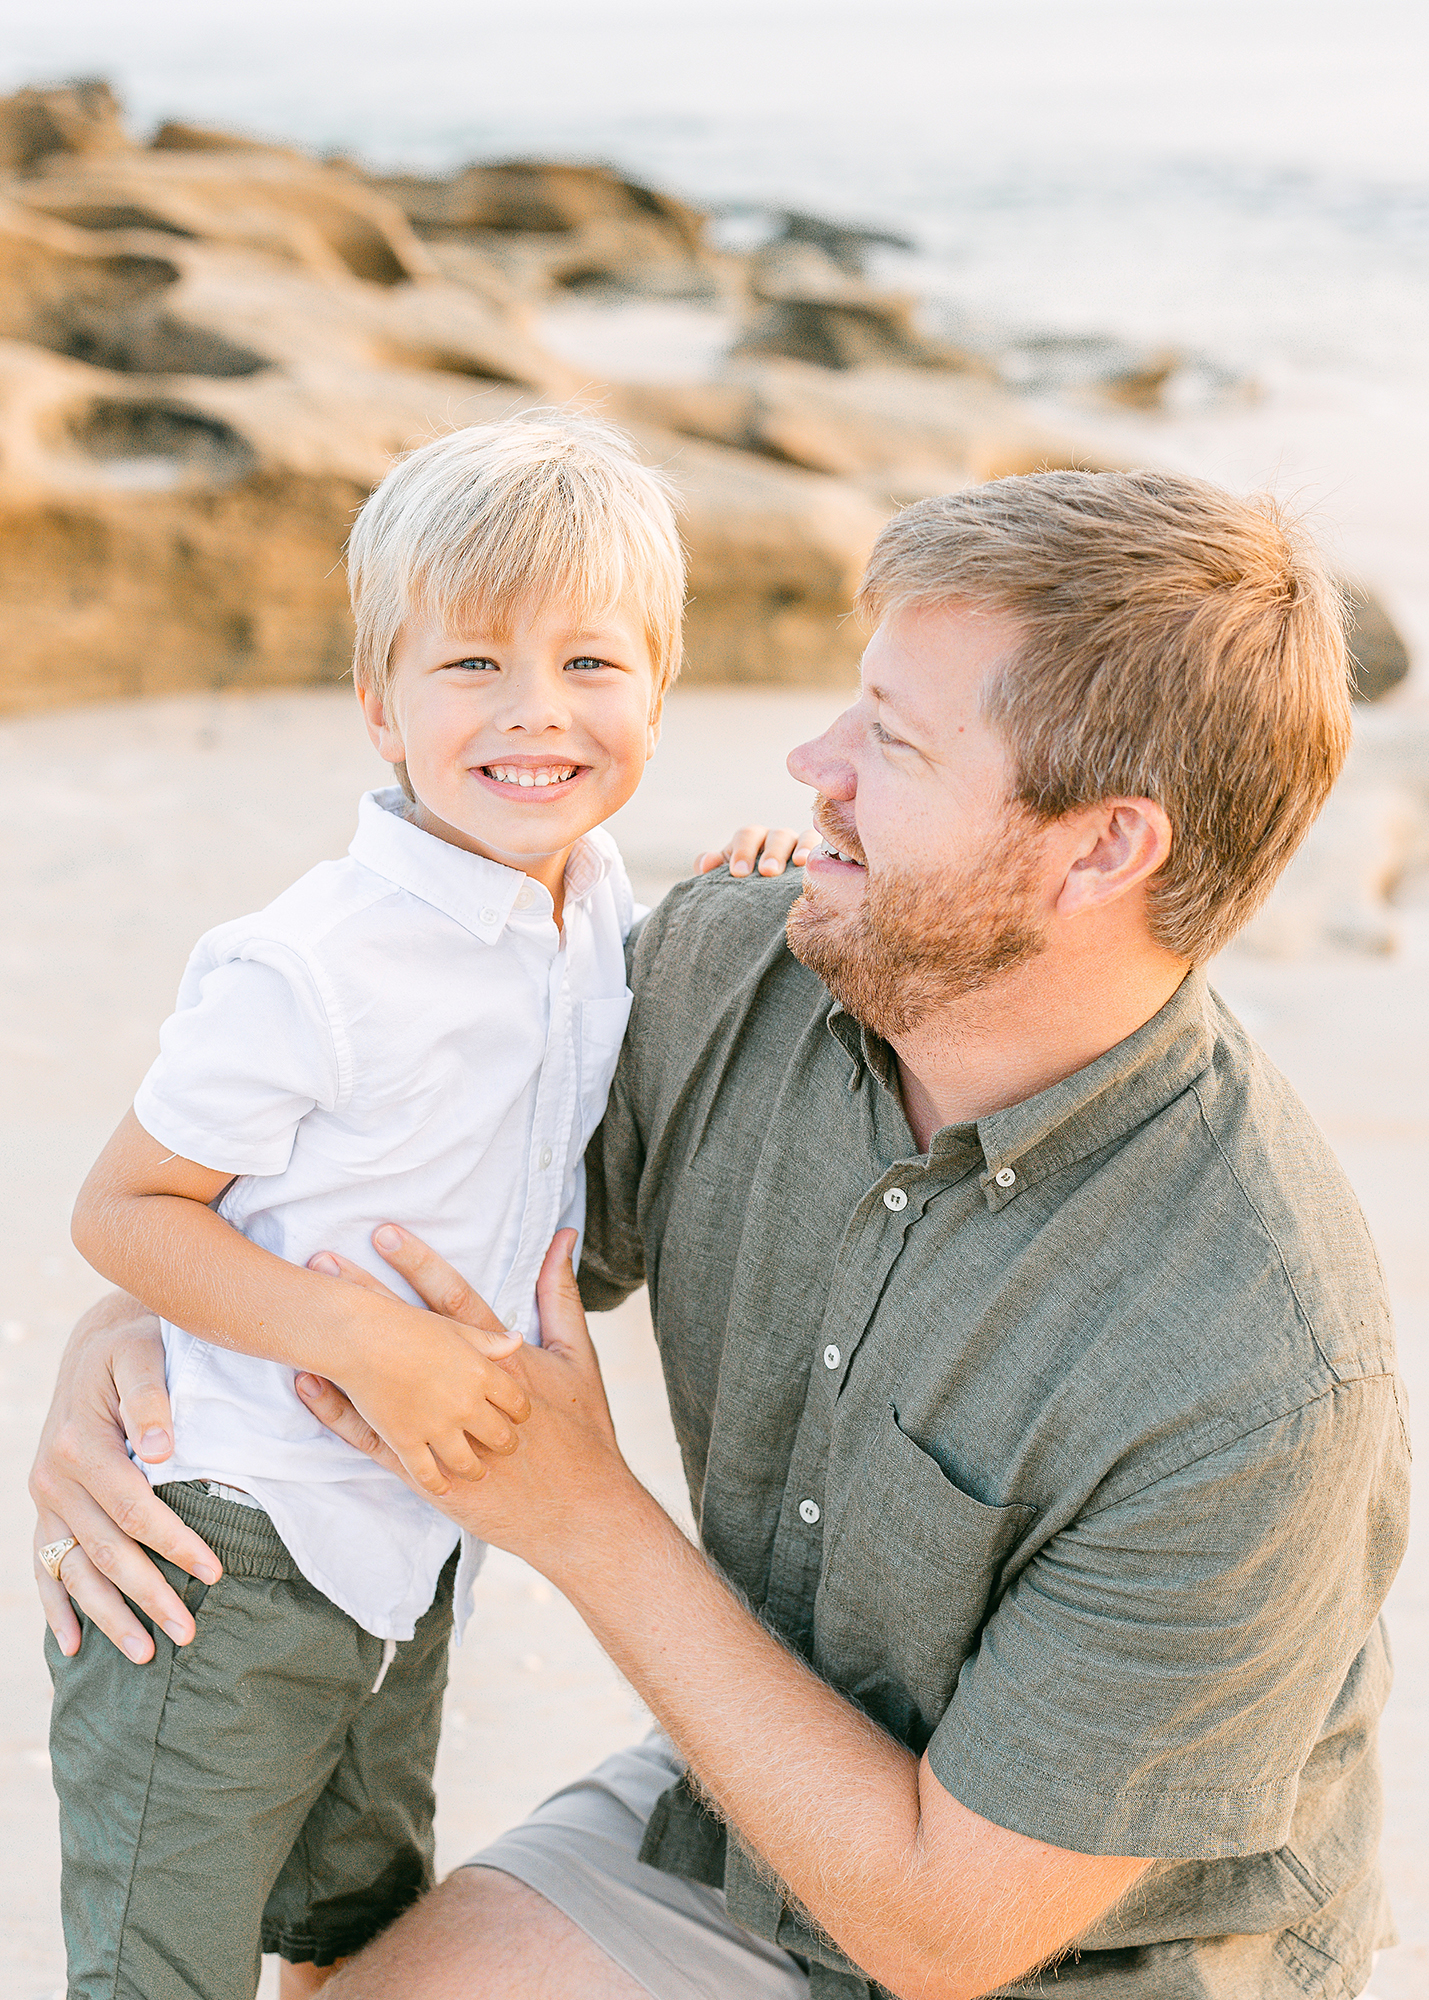 Man wearing neutral and sage green laughing with little boy on the beach at sunrise.